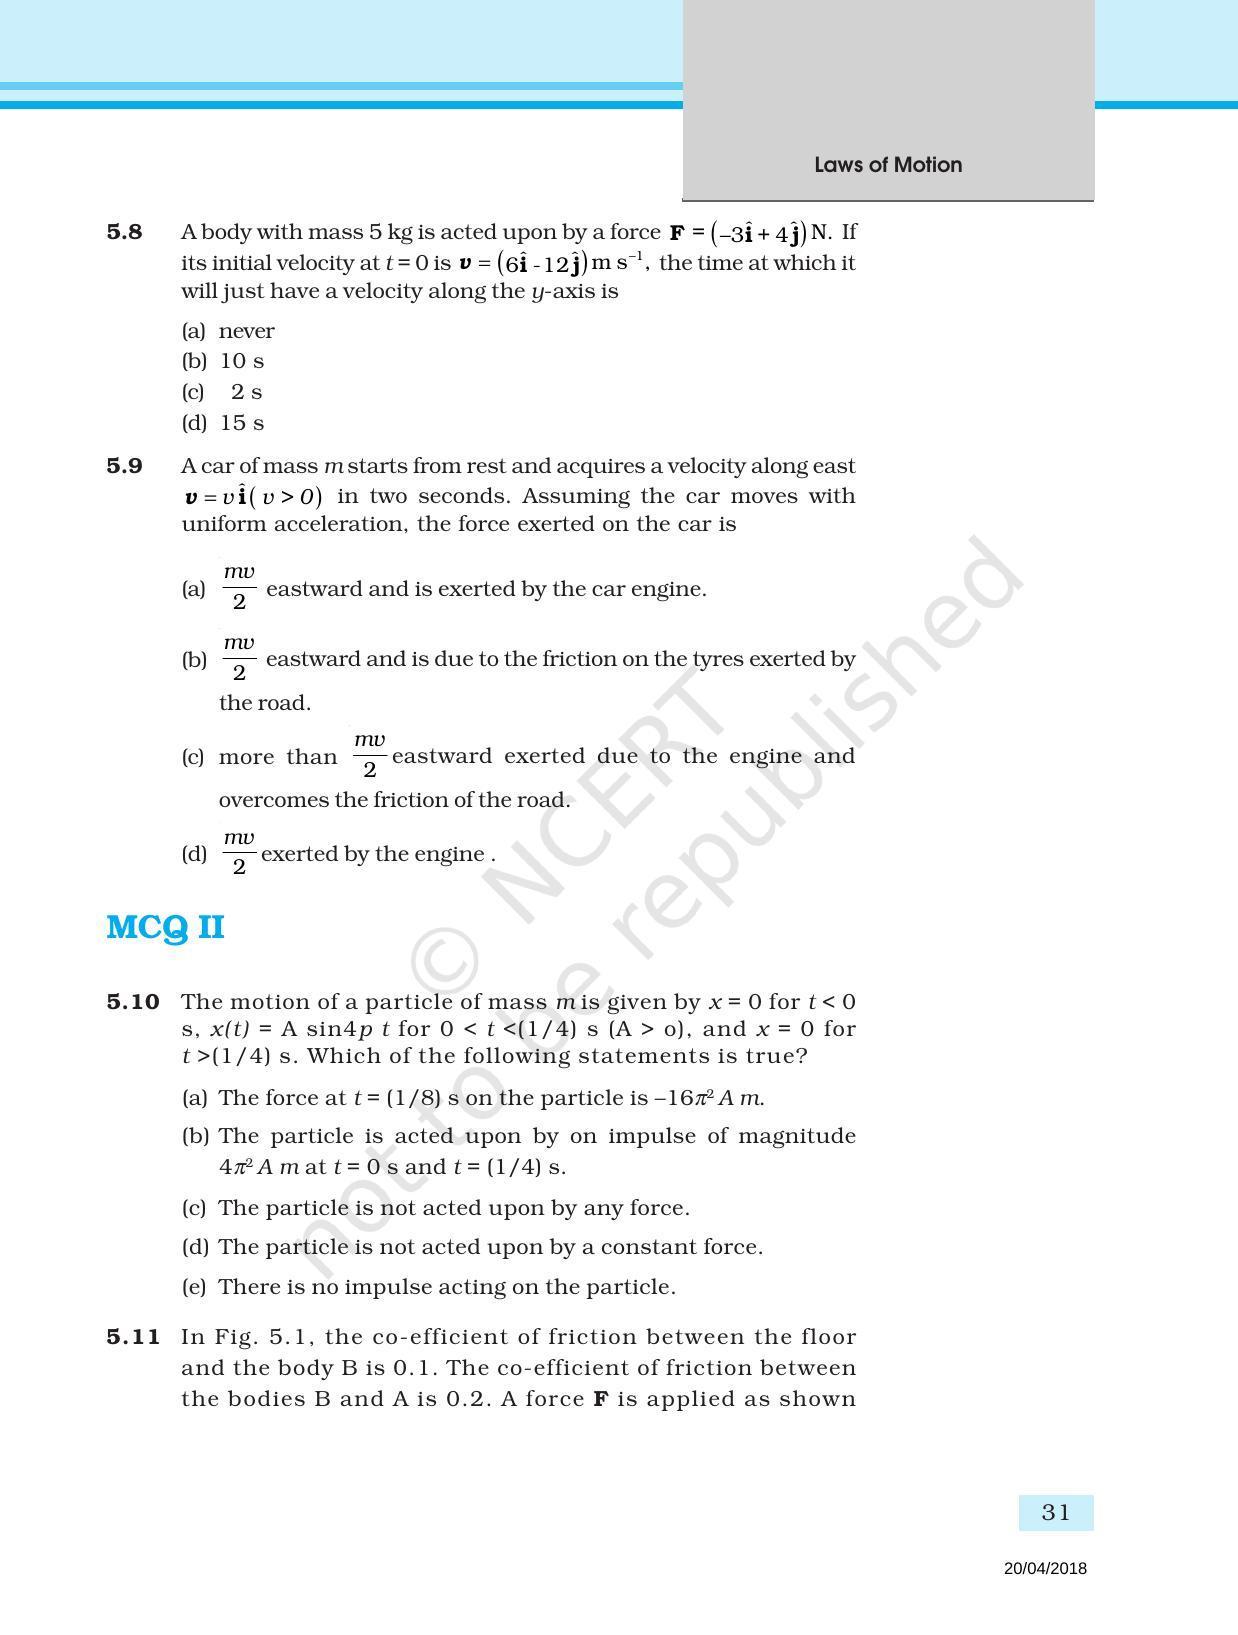 NCERT Exemplar Book for Class 11 Physics: Chapter 4 Laws of Motion - Page 3